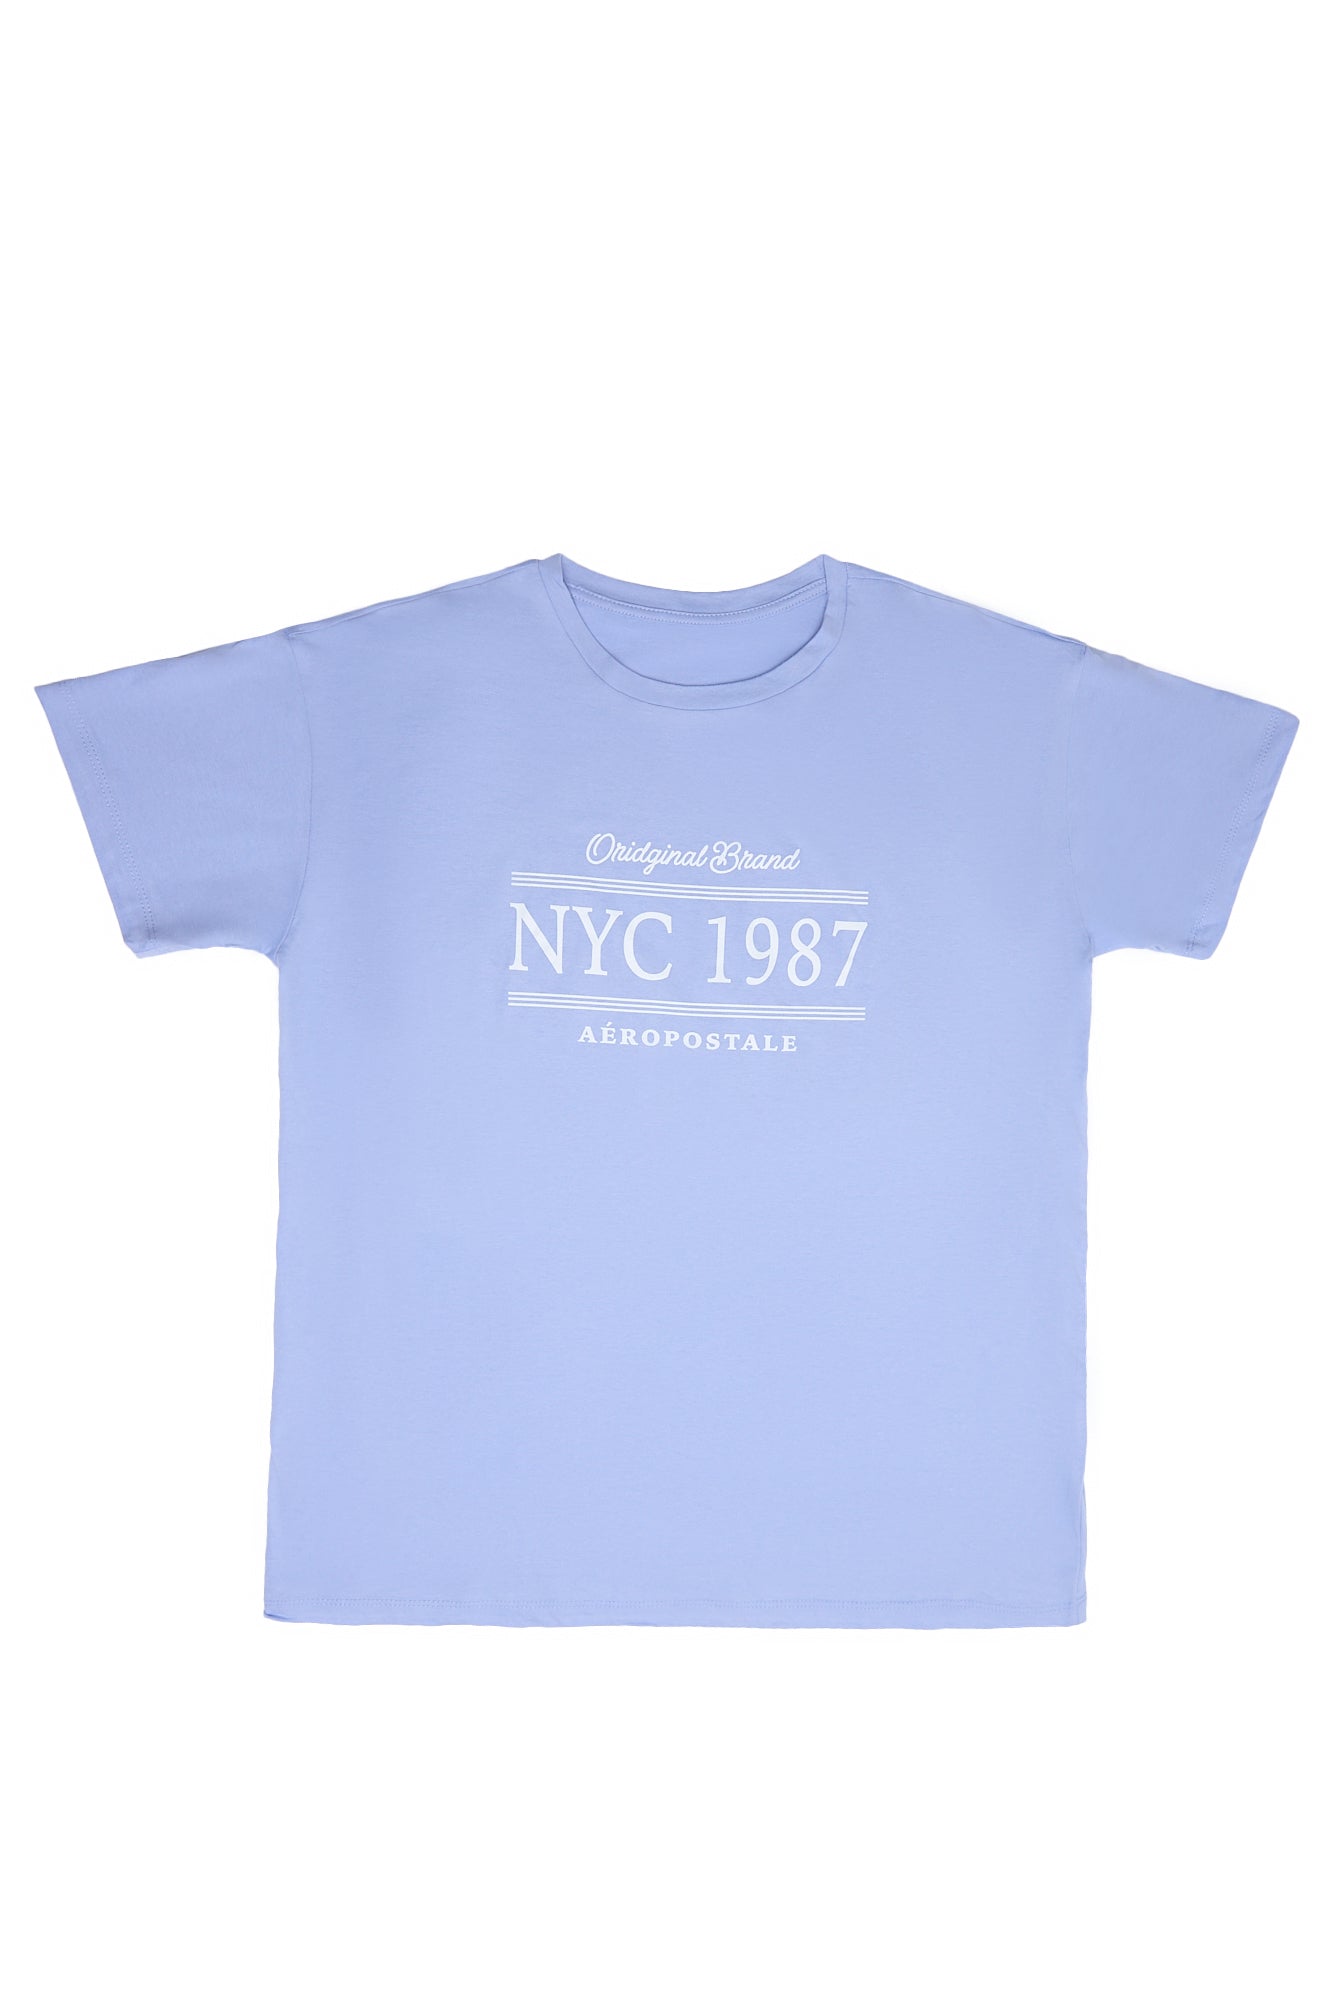 Aéropostale NYC 1987 Graphic Relaxed Tee